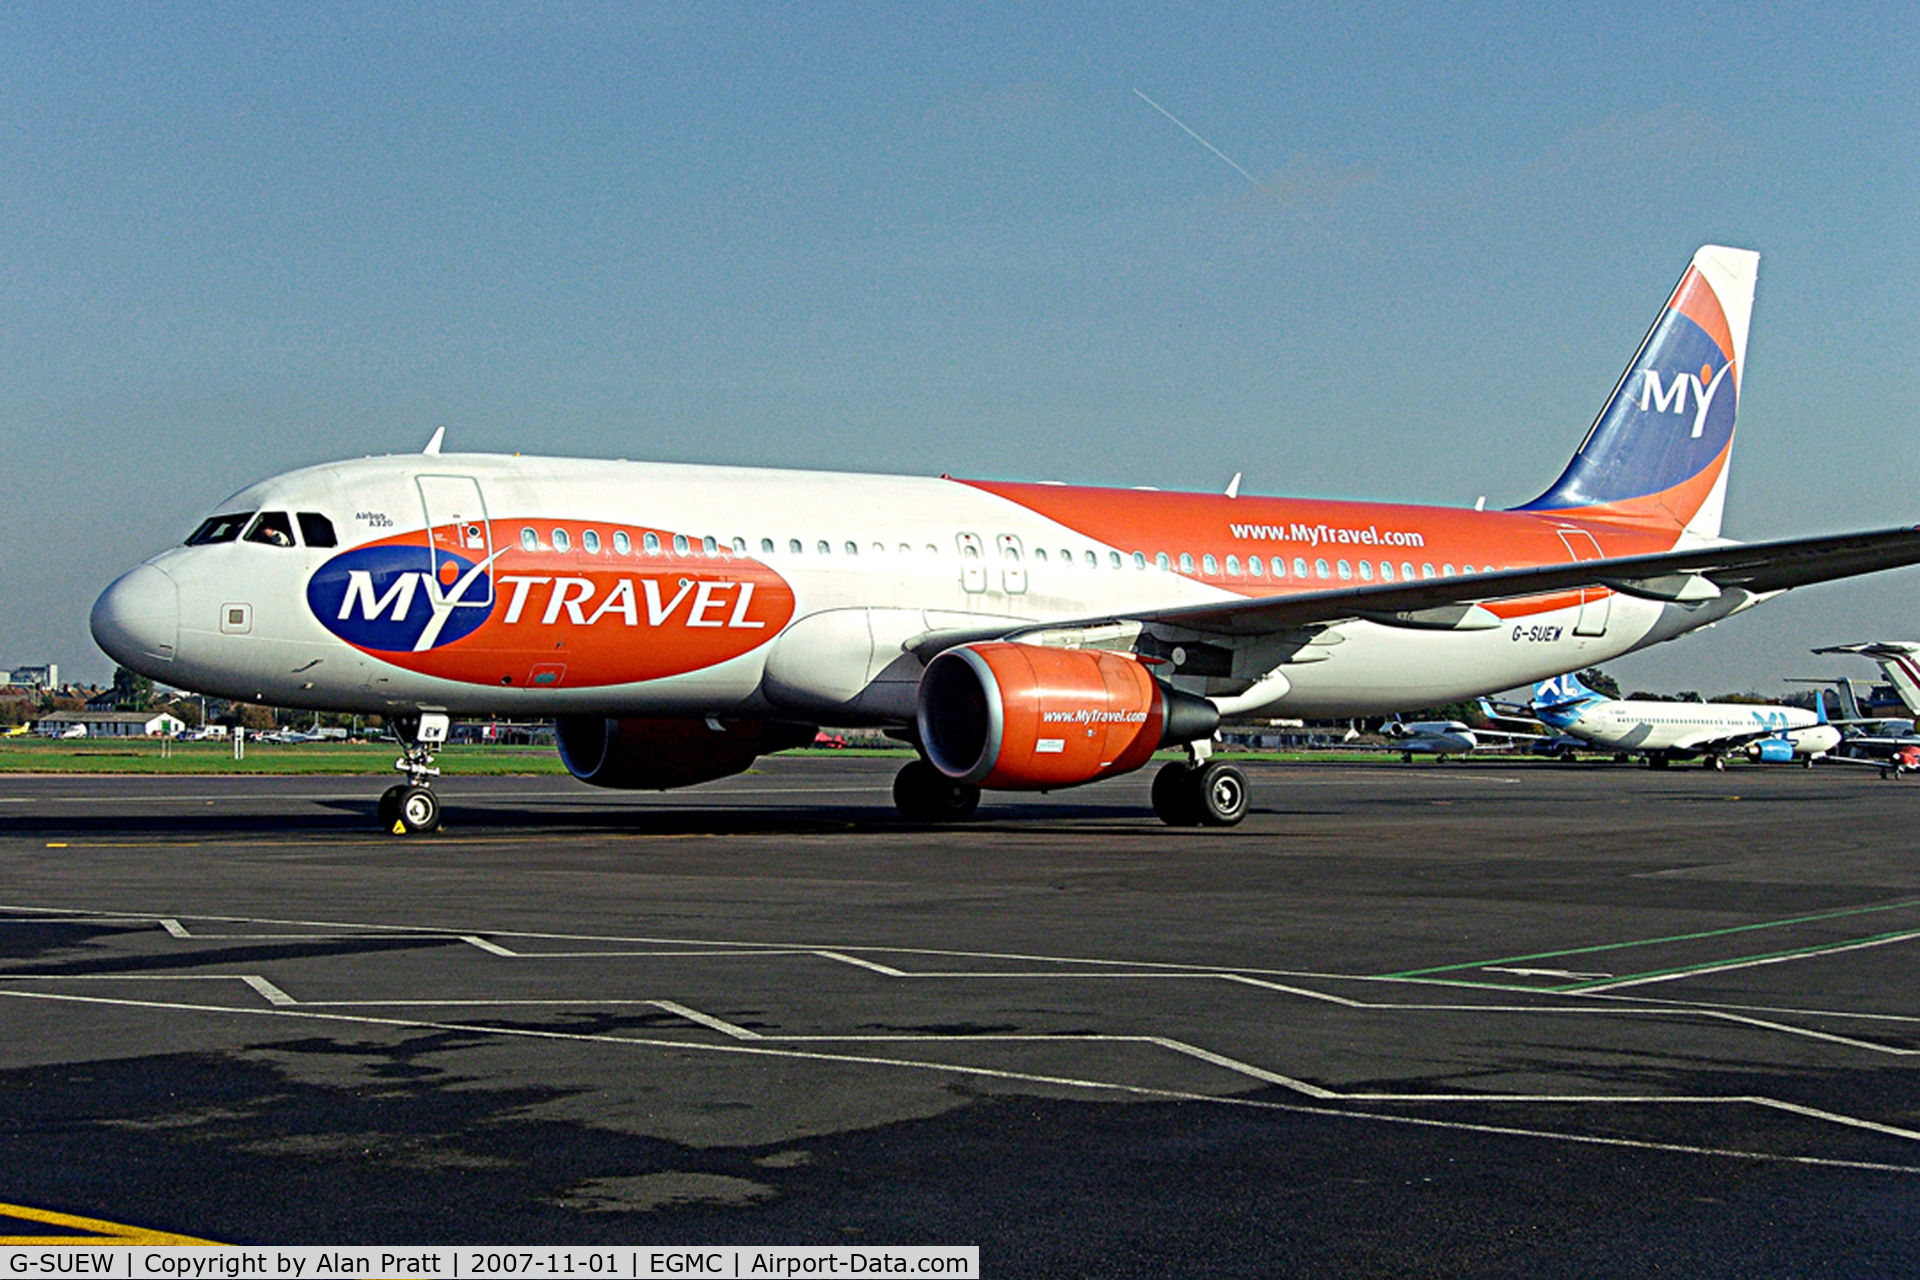 G-SUEW, 2003 Airbus A320-214 C/N 1961, Aircraft in My Travel livery taxies onto stand